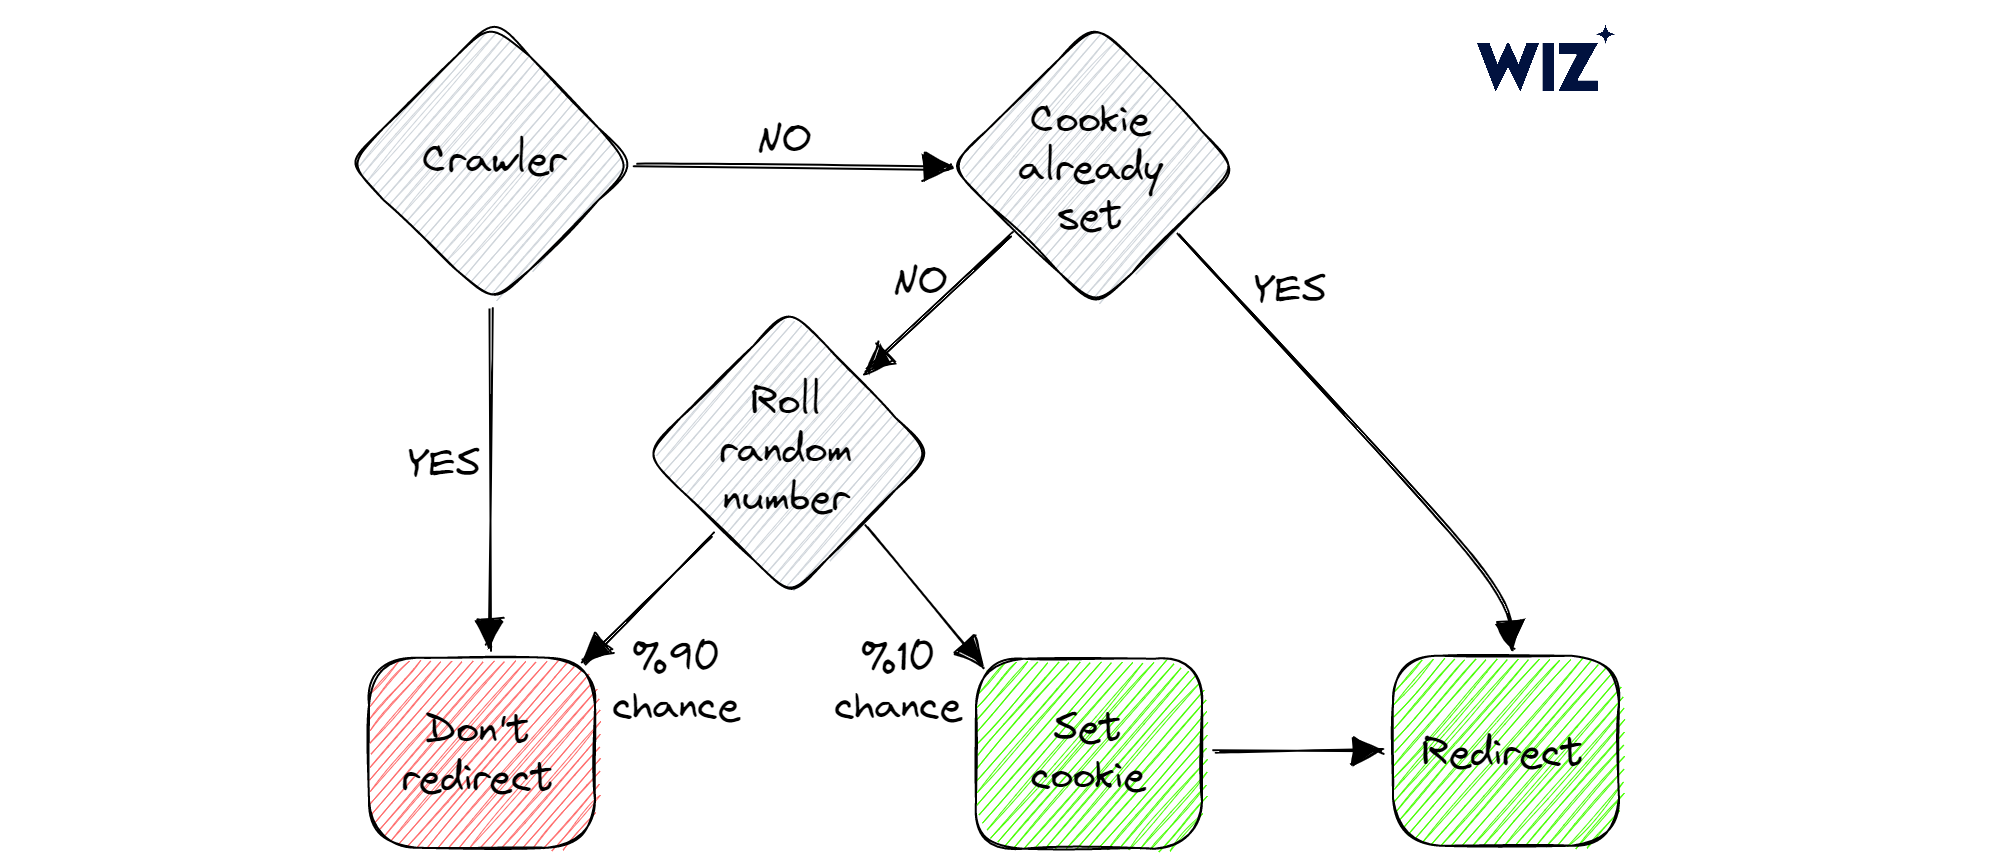 Redirection script decision tree (assuming ‘probability’ is set to 0.1)